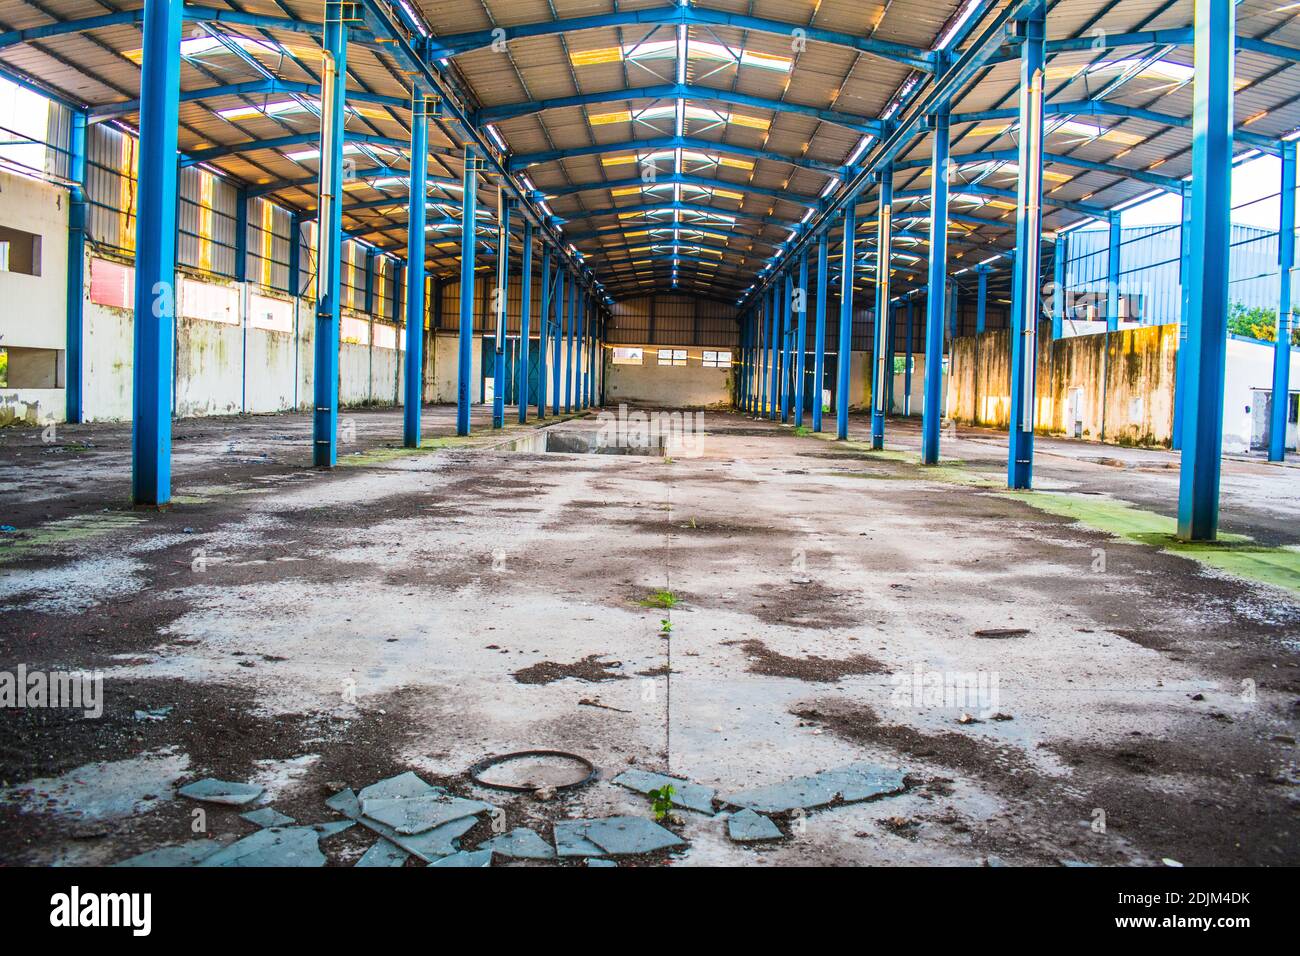 Interior Of Abandoned Building Stock Photo